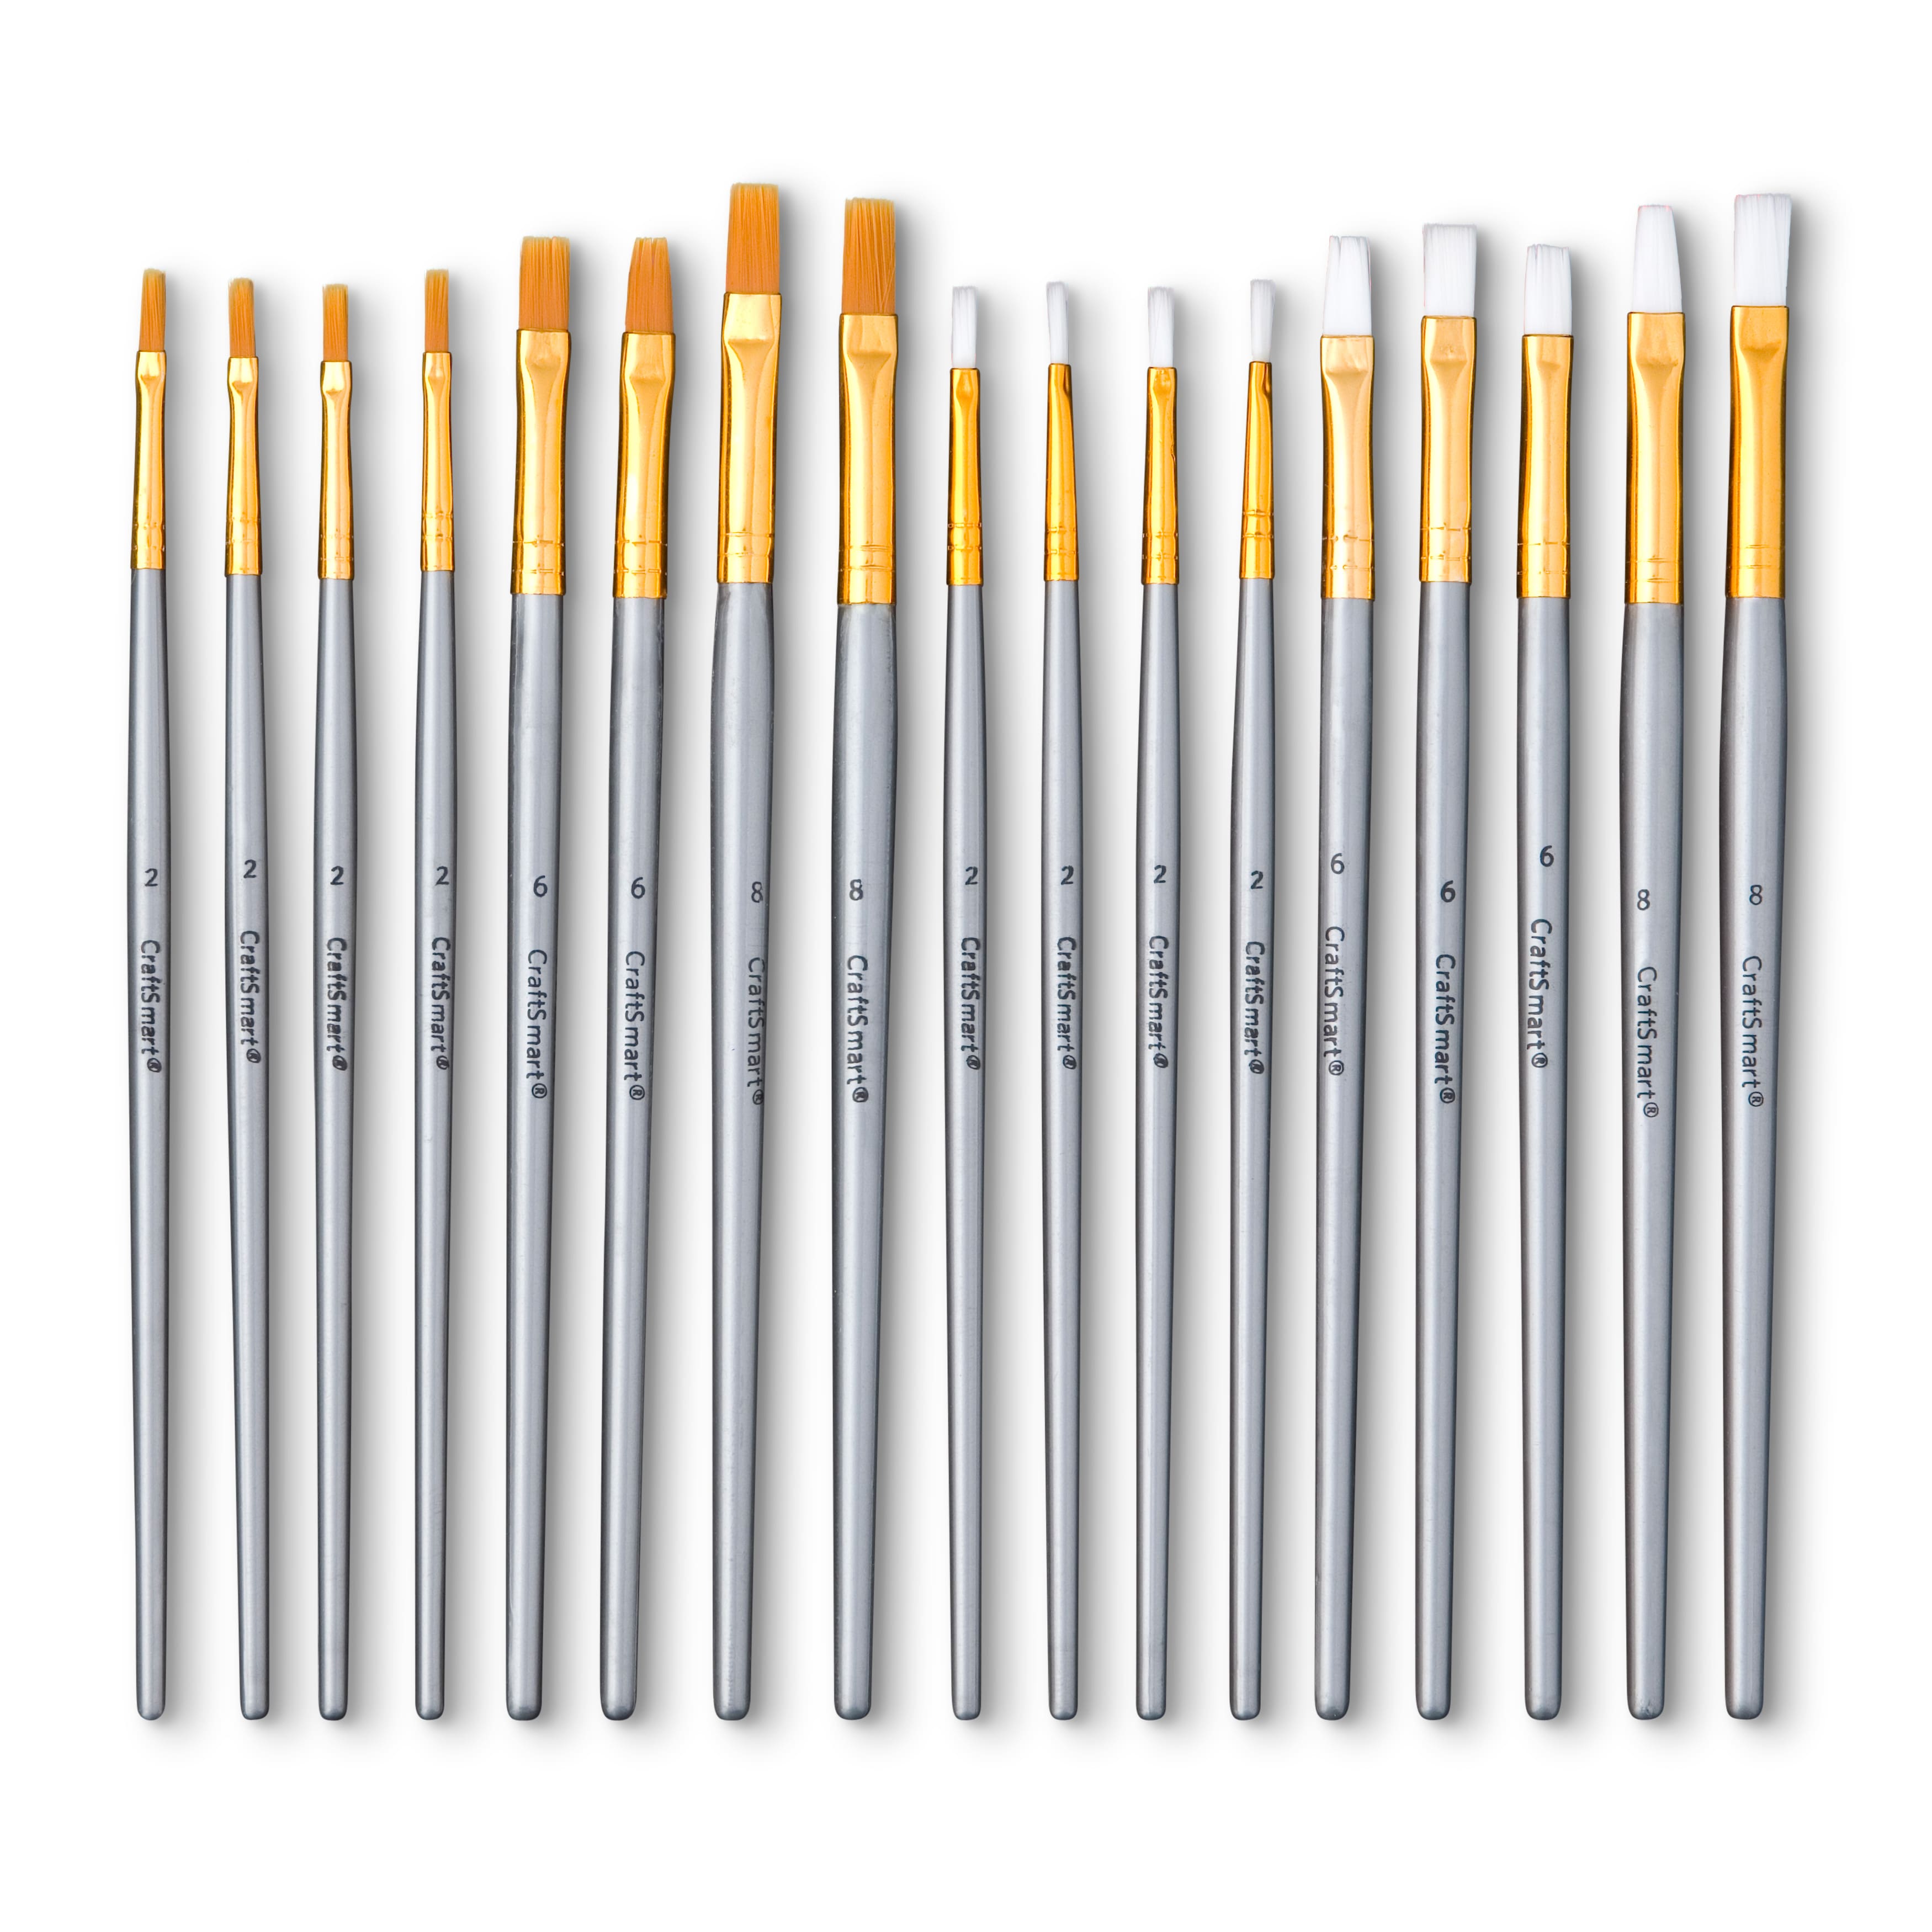 Sax Golden Taklon Watercolor Paint Brushes, Round Type, Assorted Sizes, Set  of 6